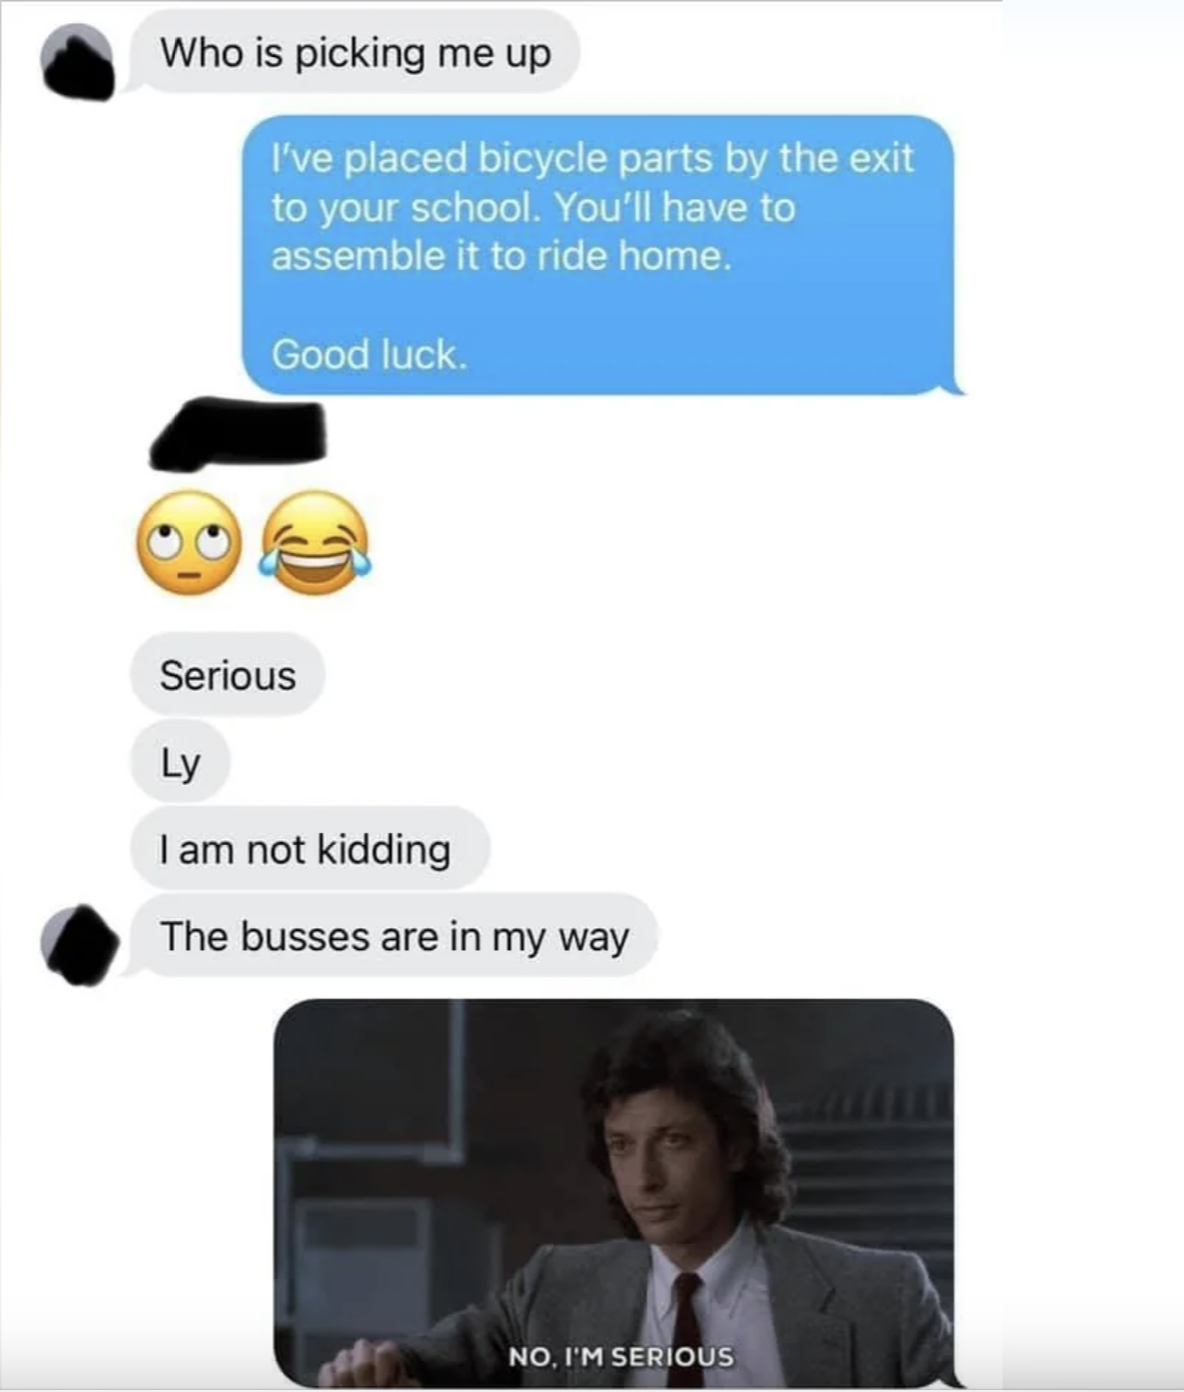 Screenshot of text conversation: &quot;Who is picking me up?&quot; Response: &quot;I&#x27;ve placed bicycle parts by the exit to your school. You&#x27;ll have to assemble it to ride home. Good luck.&quot; The conversation includes emojis and a reaction GIF with text &quot;NO, I&#x27;M SERIOUS.&quot;